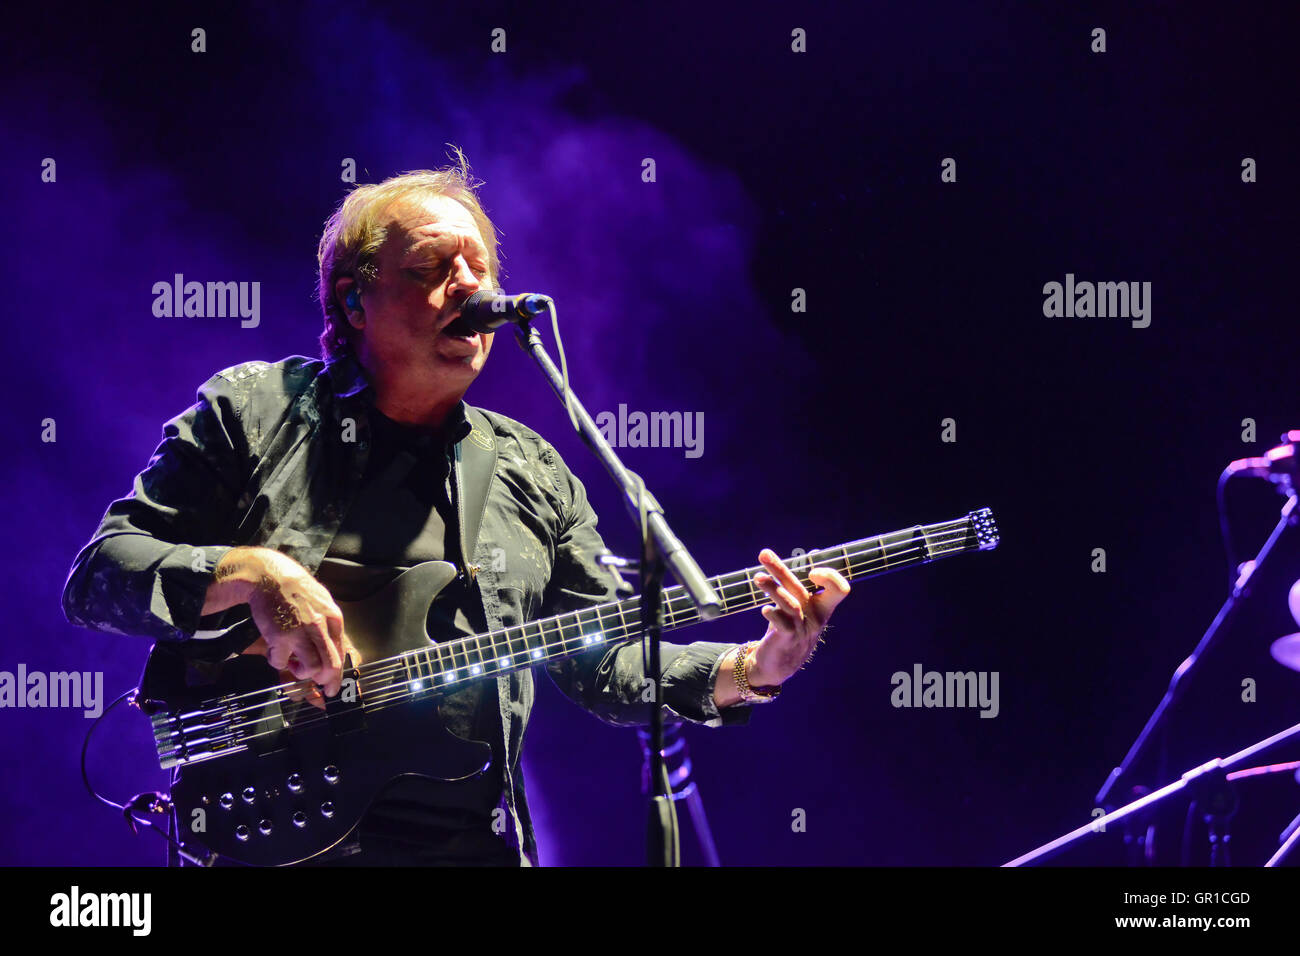 British band Level 42 had their first concert ever in Buenos Aires, as part of their Latin American tour. Photo: bass player and band leader Mark King. Stock Photo